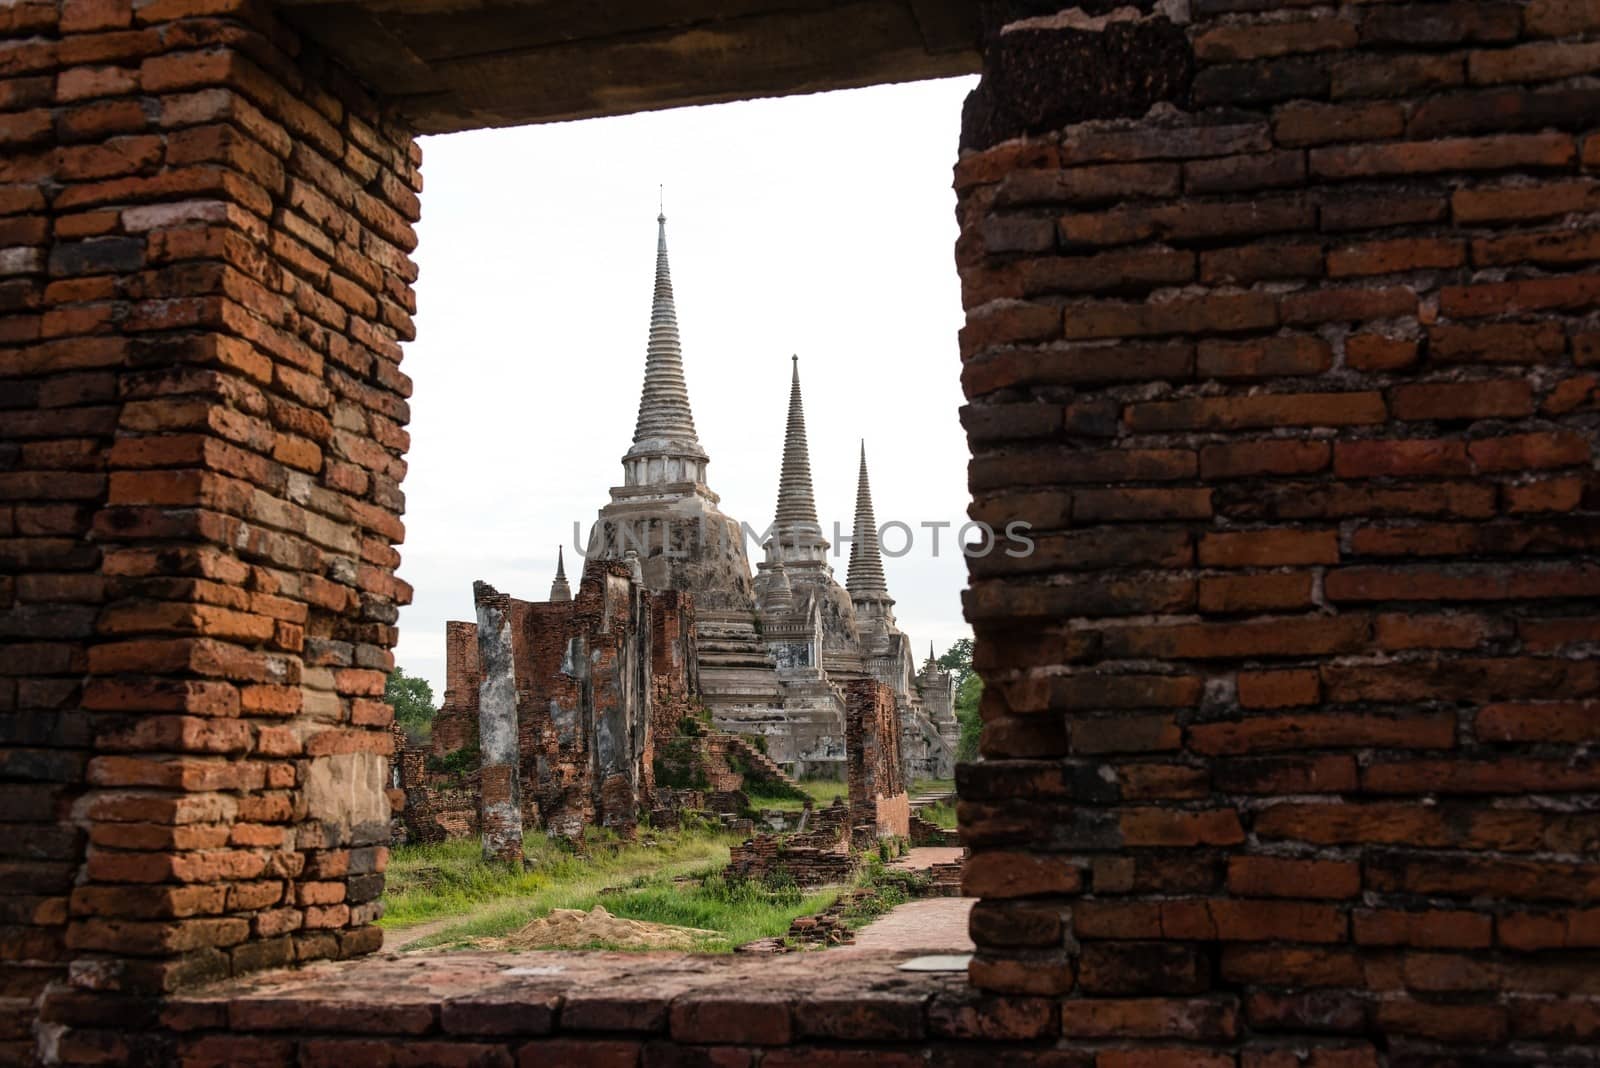 The ancient city of Thailand by sasilsolutions